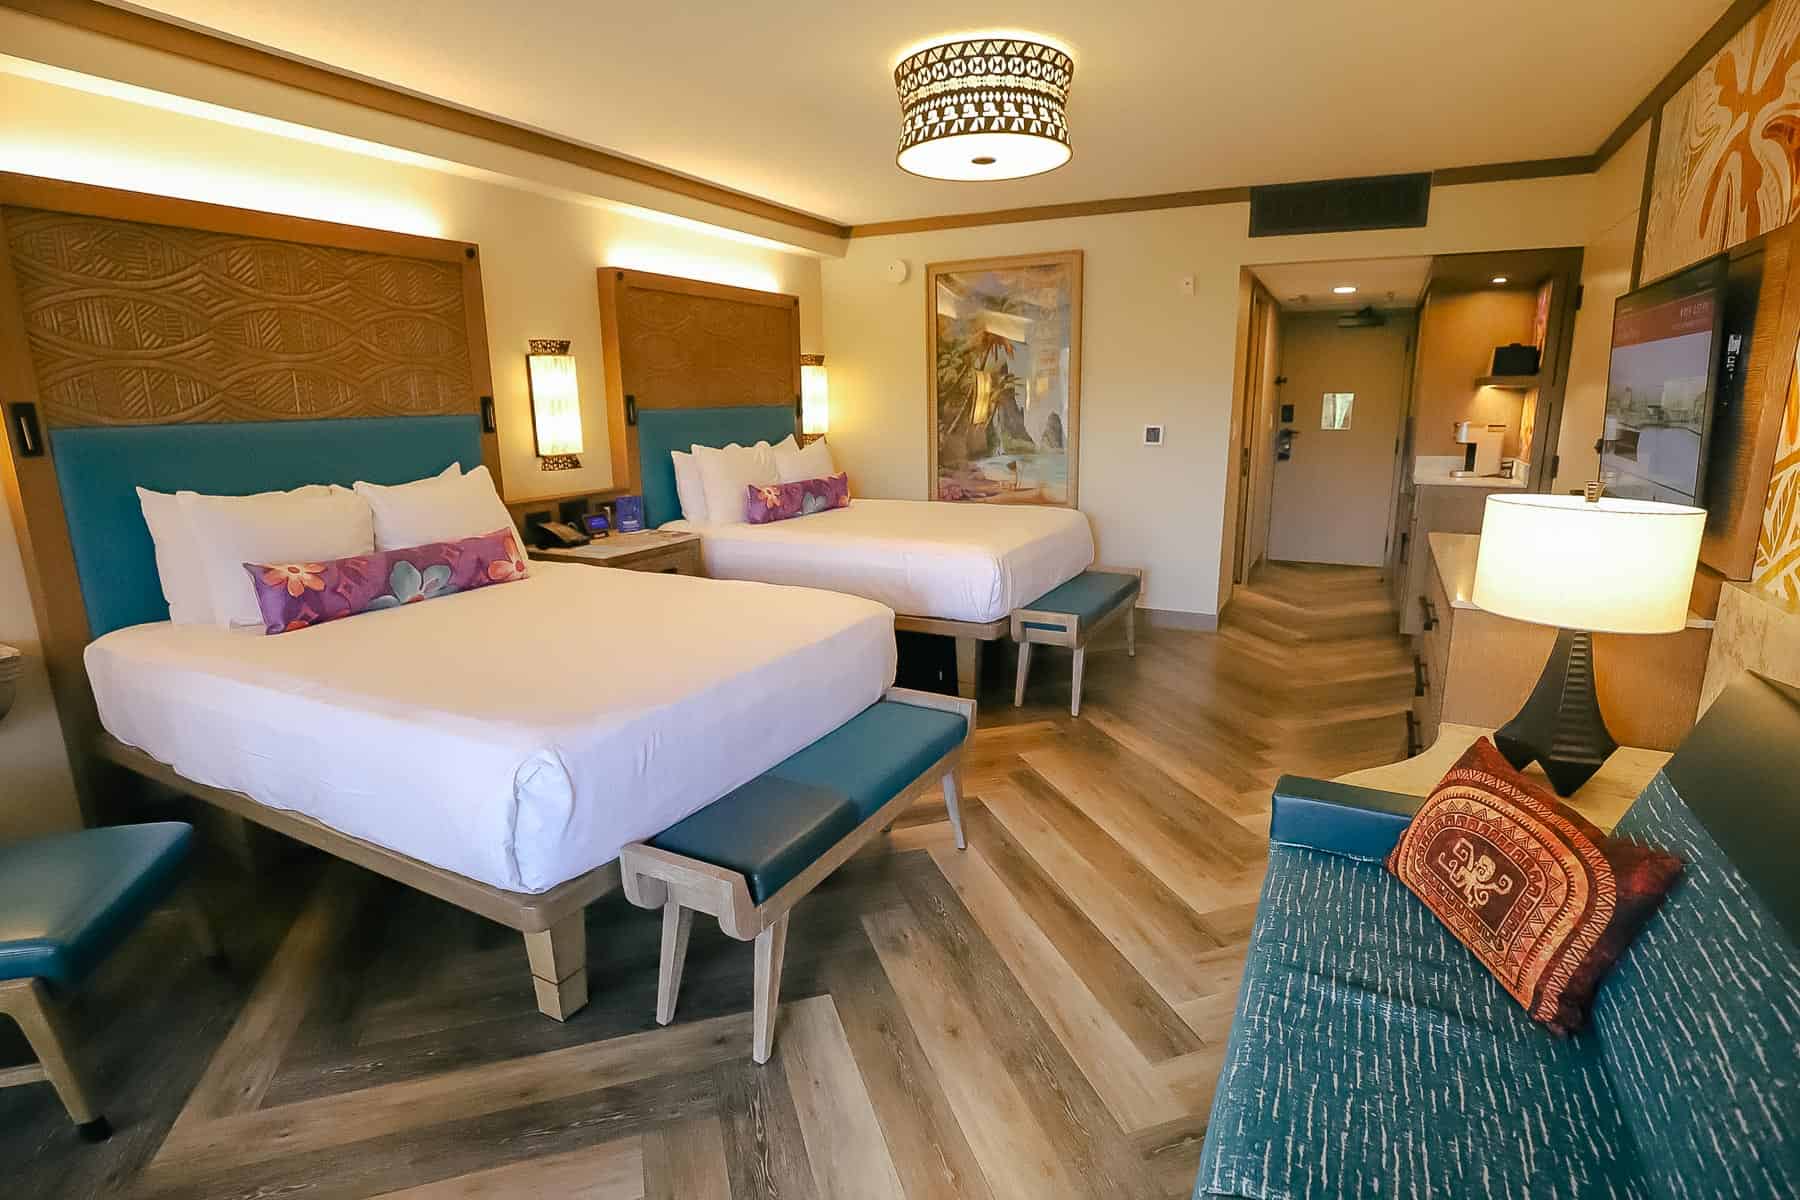 the Moana-themed room with two queen beds, a turquoise sofa that folds to make a single bed, and solid surface flooring